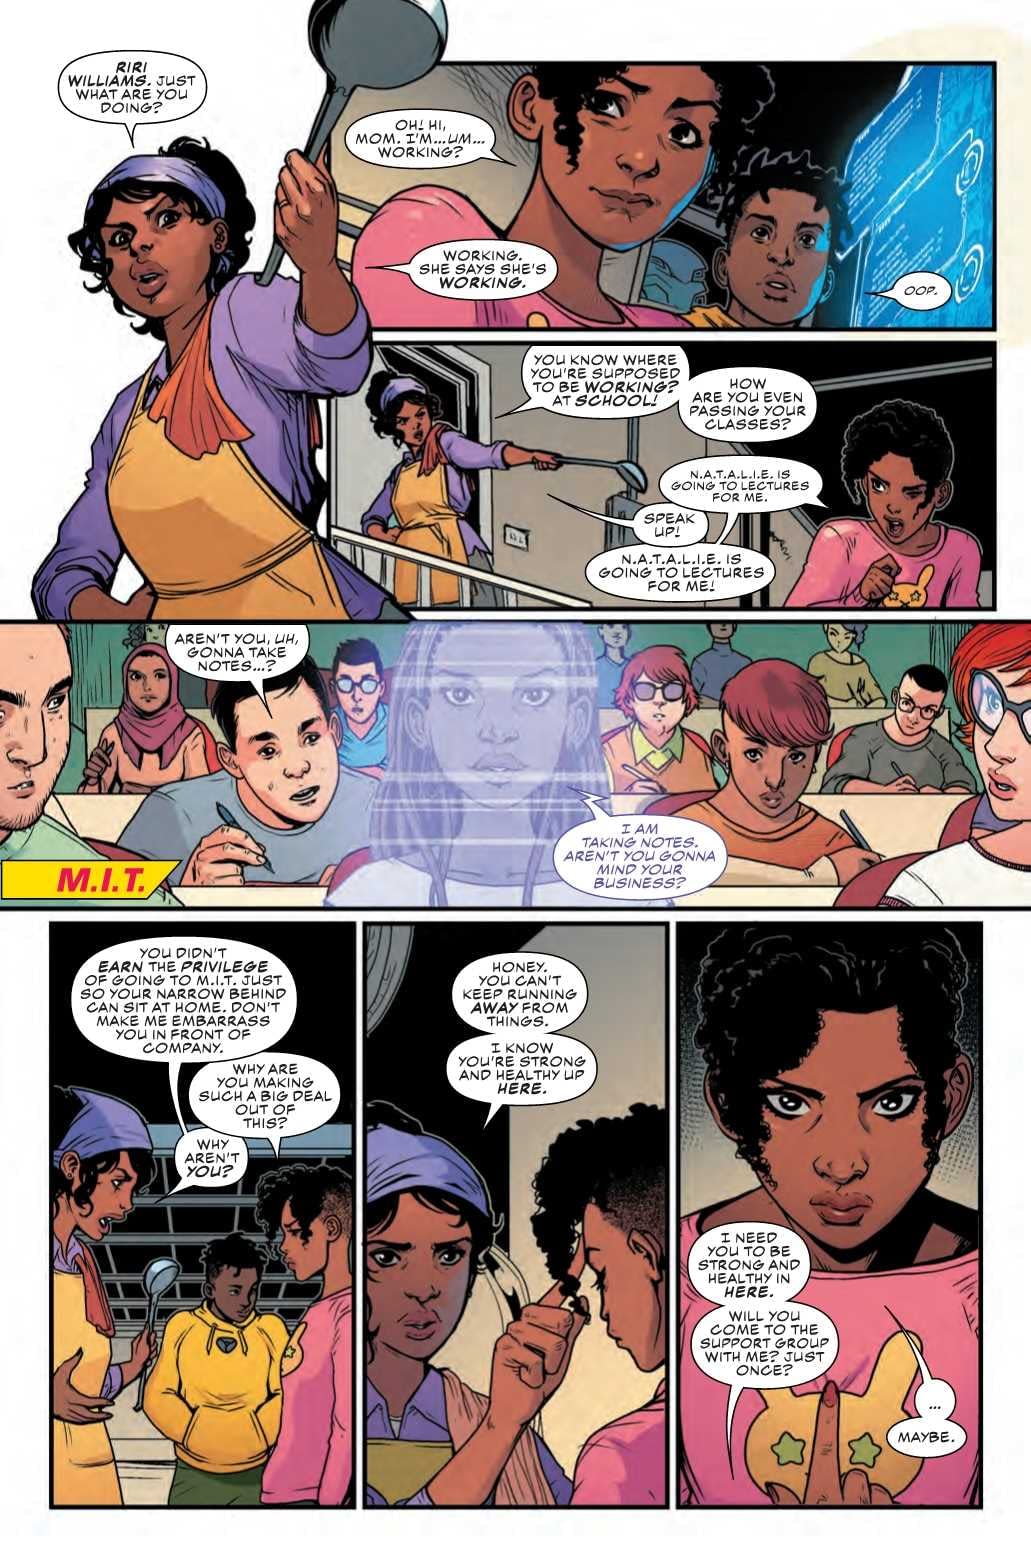 Even Superheroes Need a Good Lecture Sometimes in Next Week's Ironheart #3